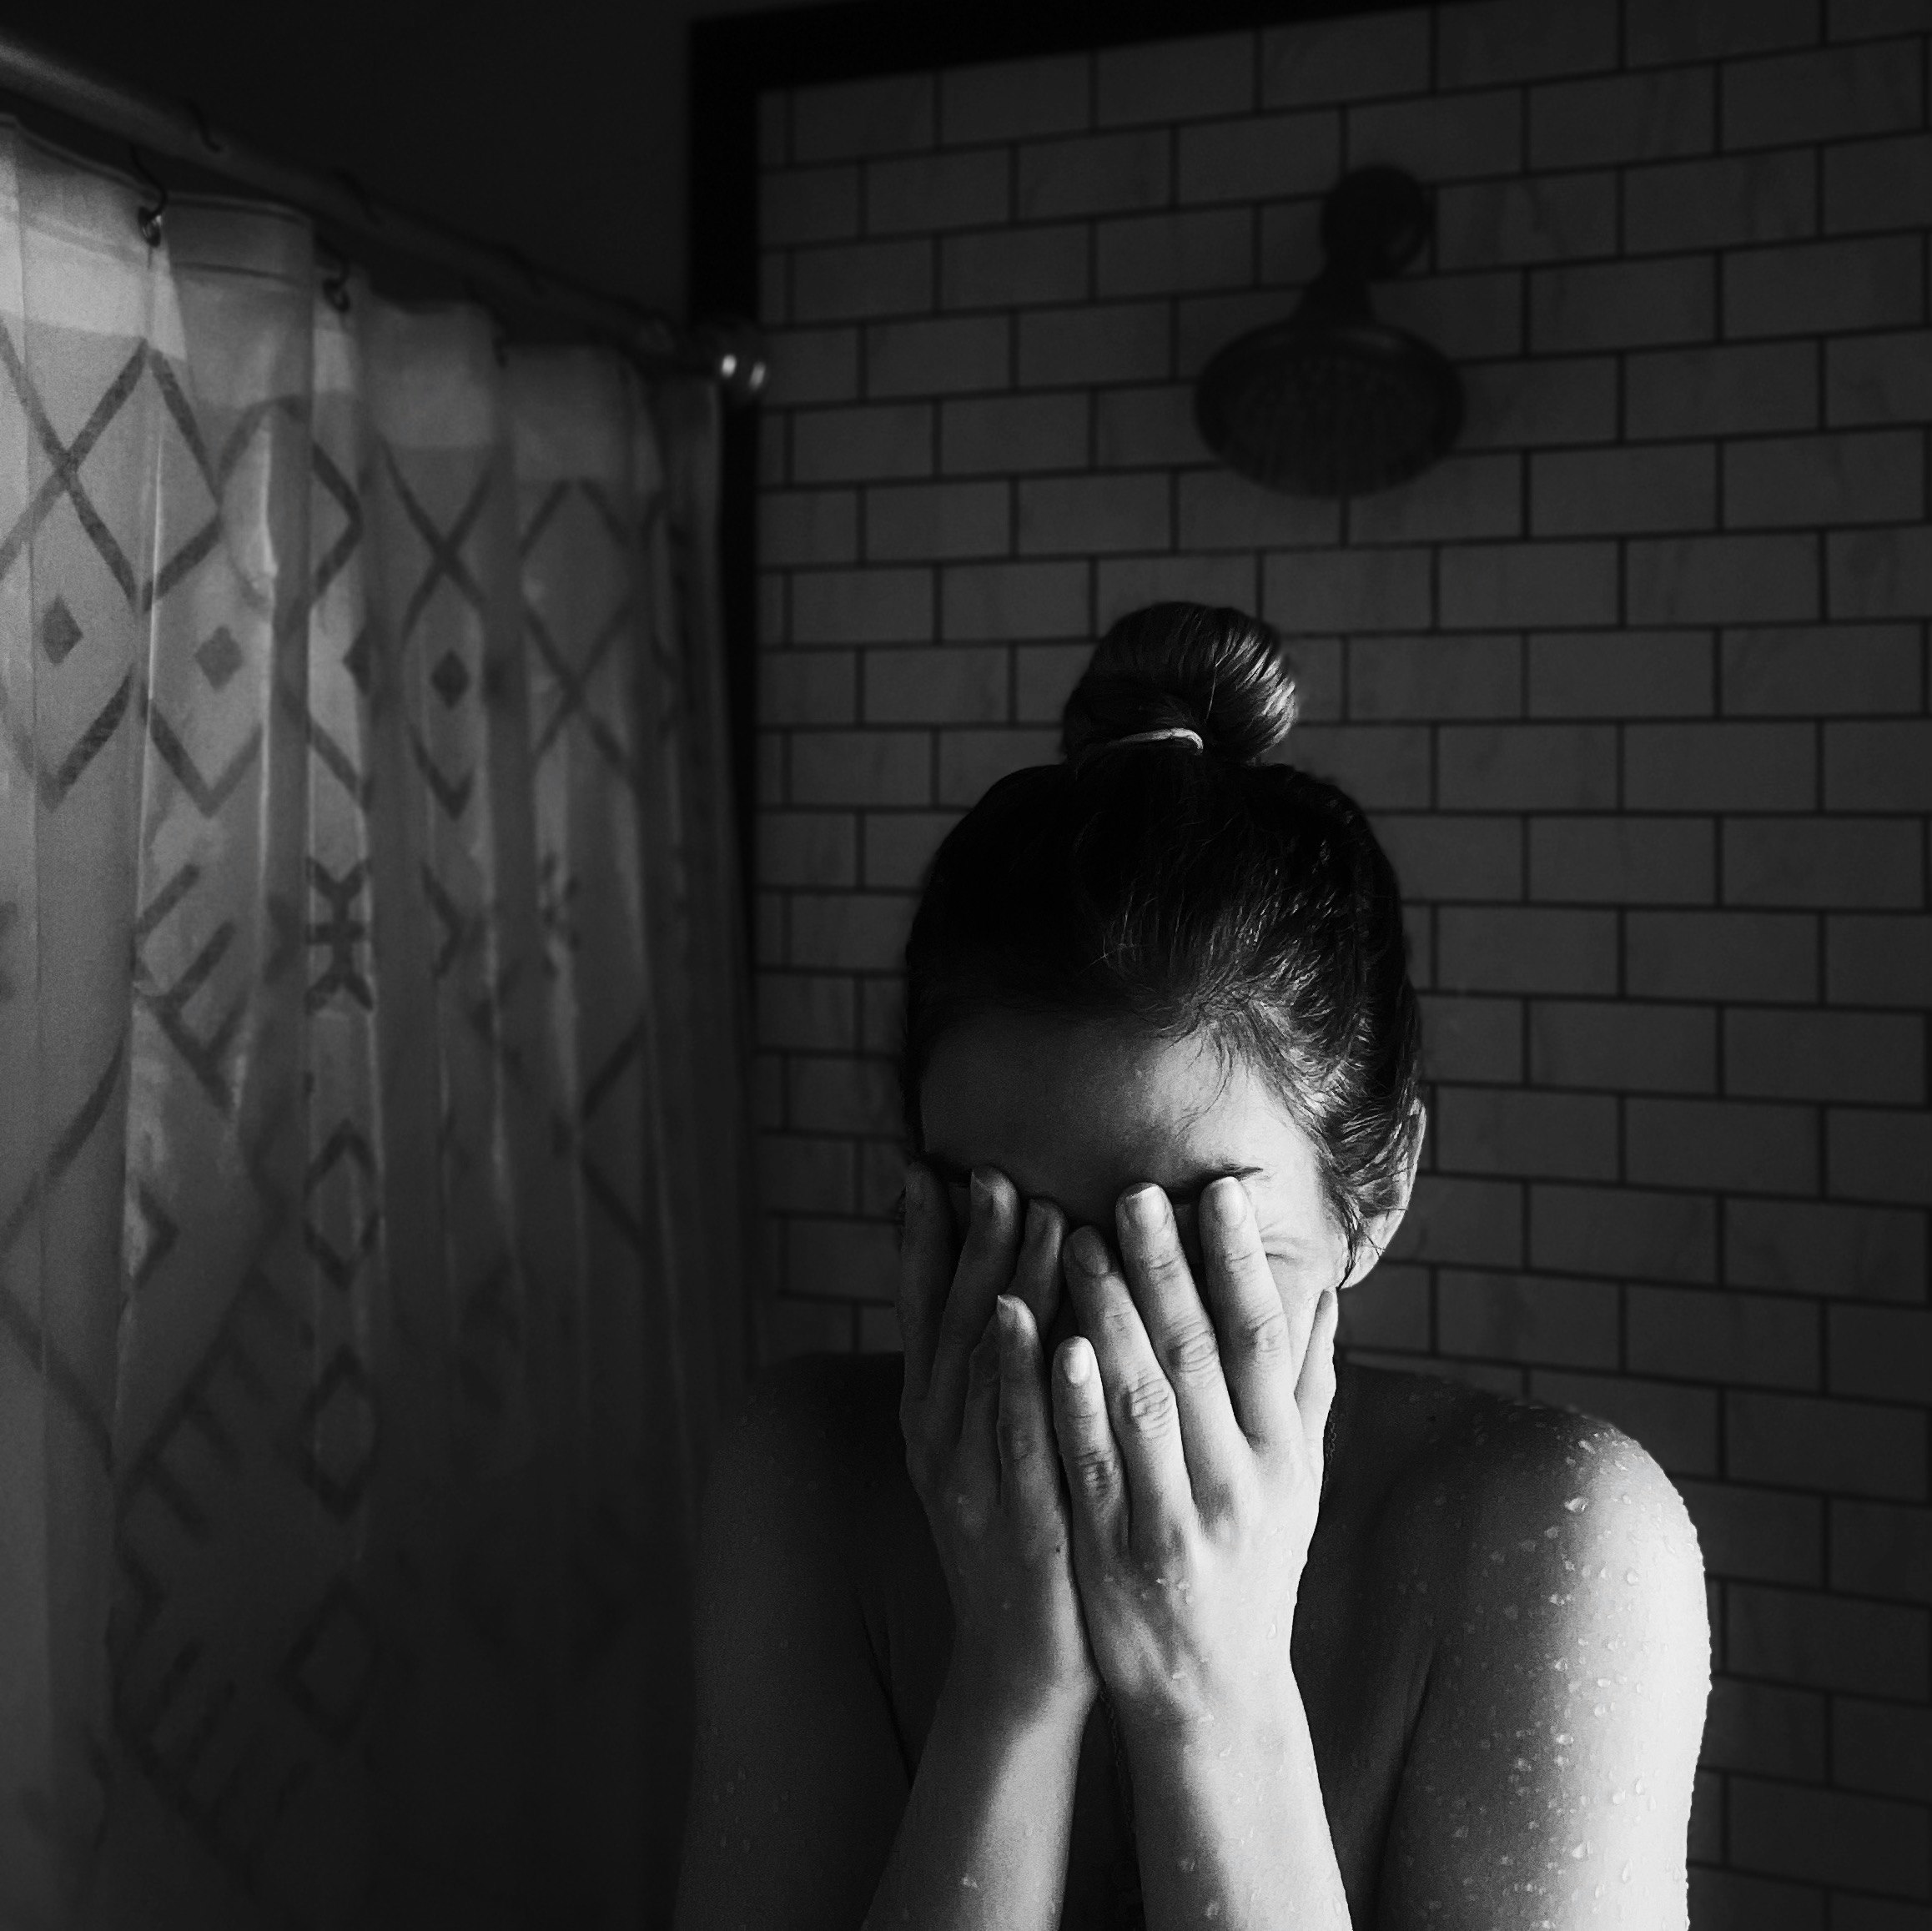 Sad woman in the shower